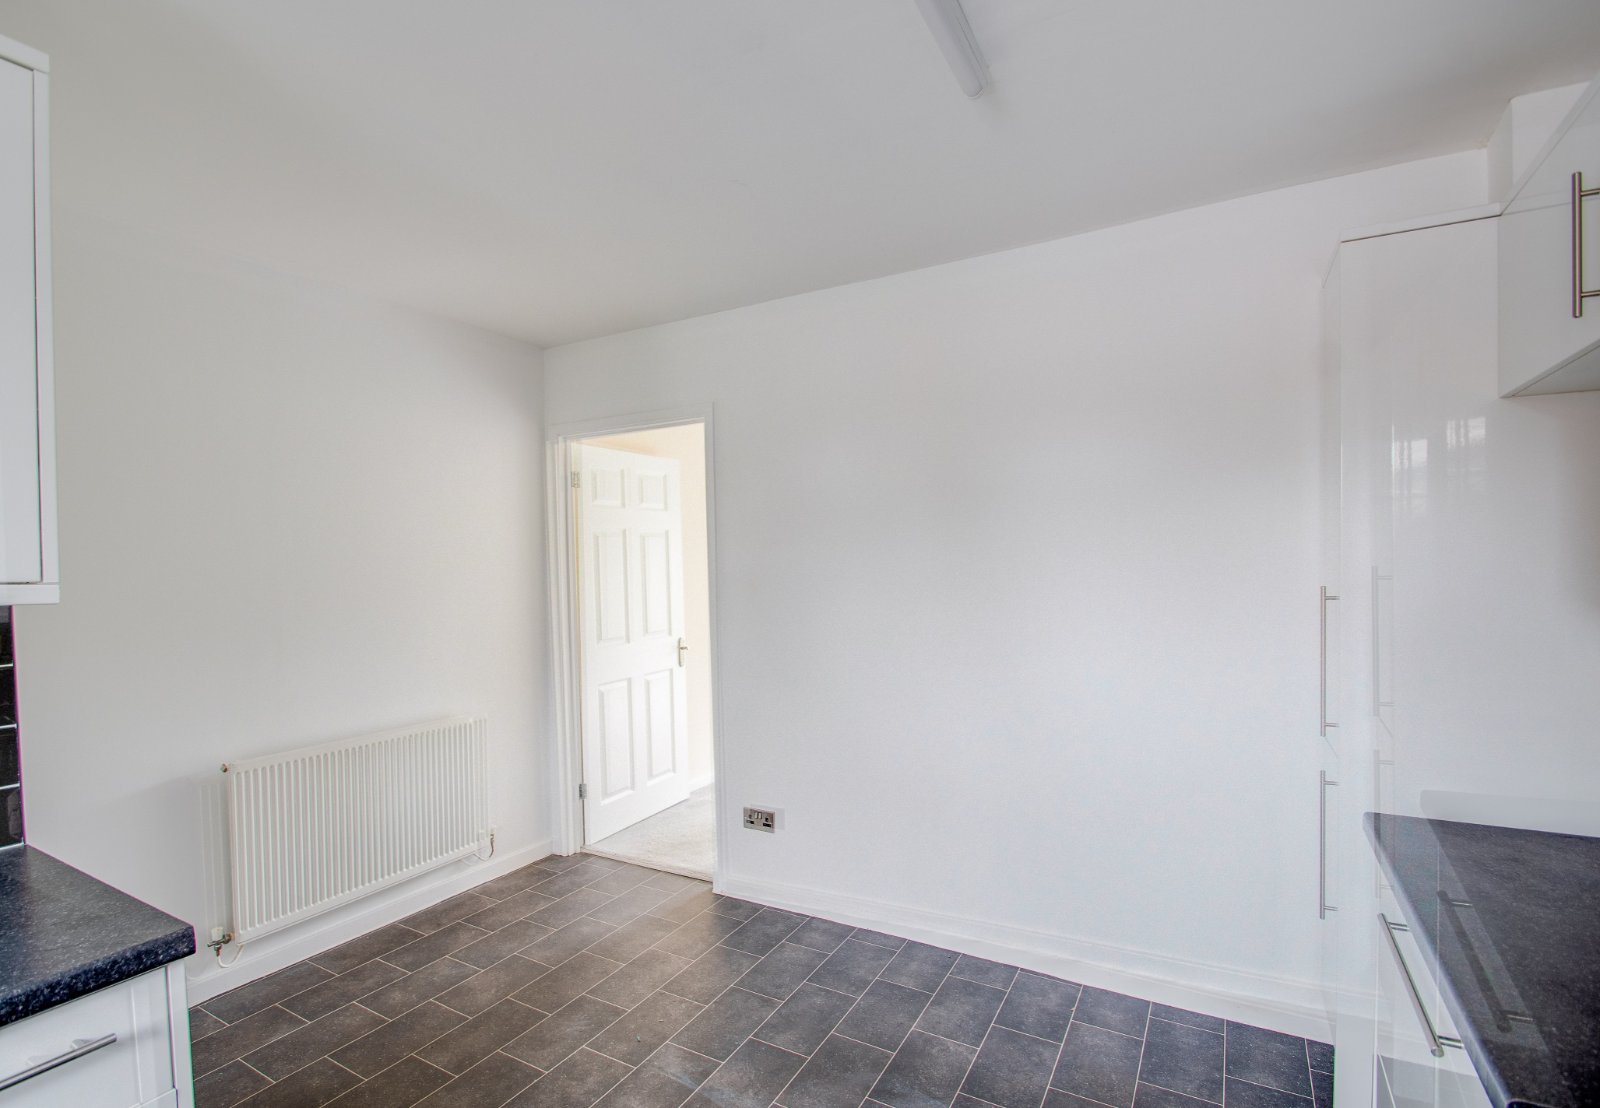 2 bed house to rent in Acorn Road, Catshill  - Property Image 3